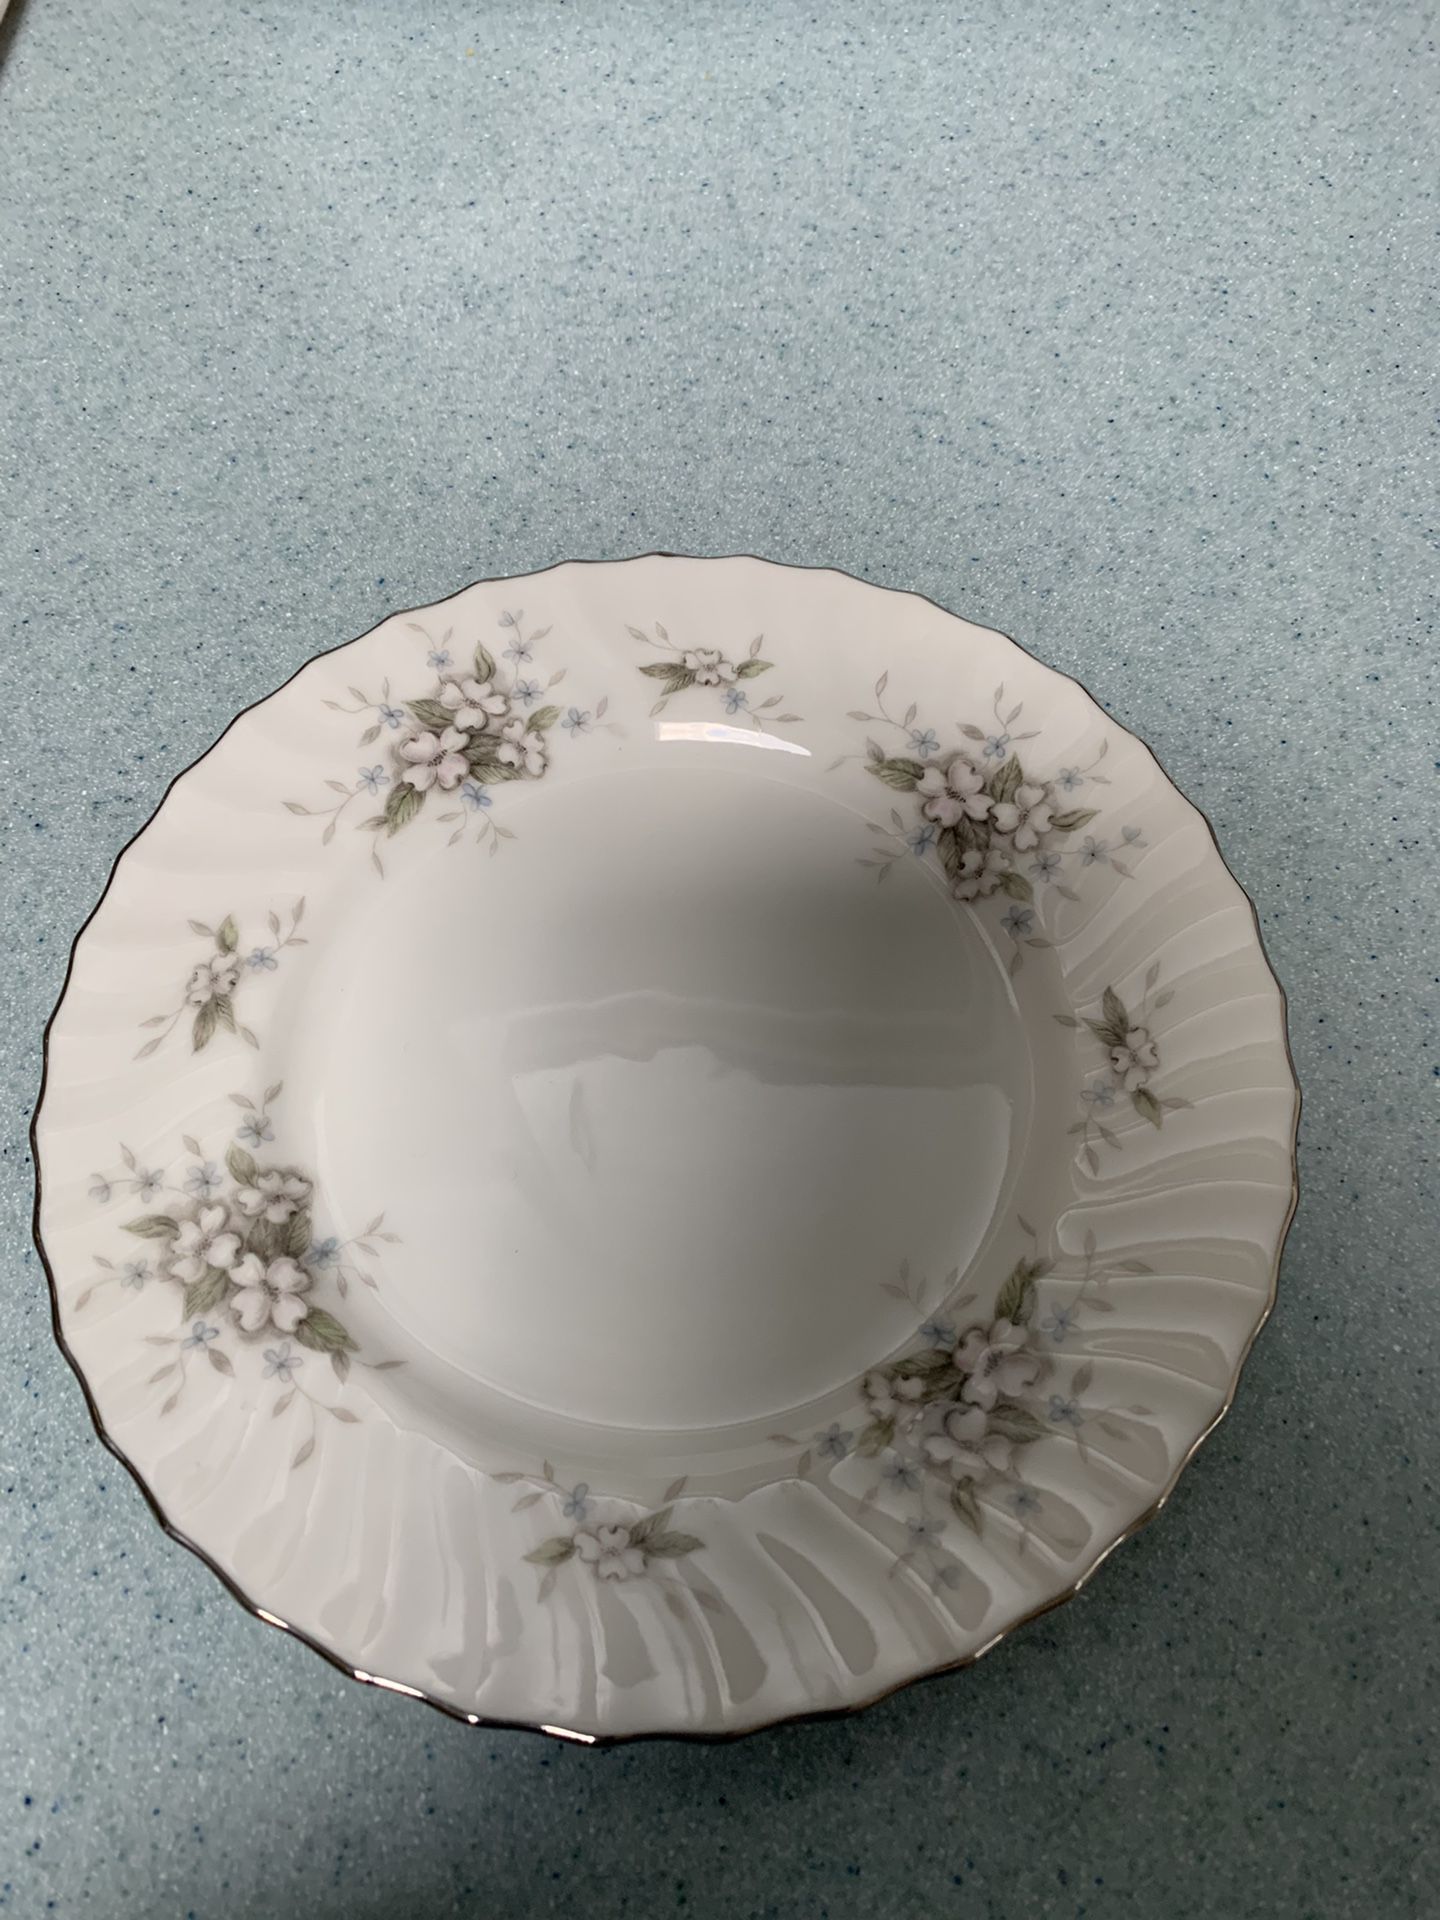 Mikassa china with serving pieces including Vegetable Bowls And Platters Local Pick Up Only